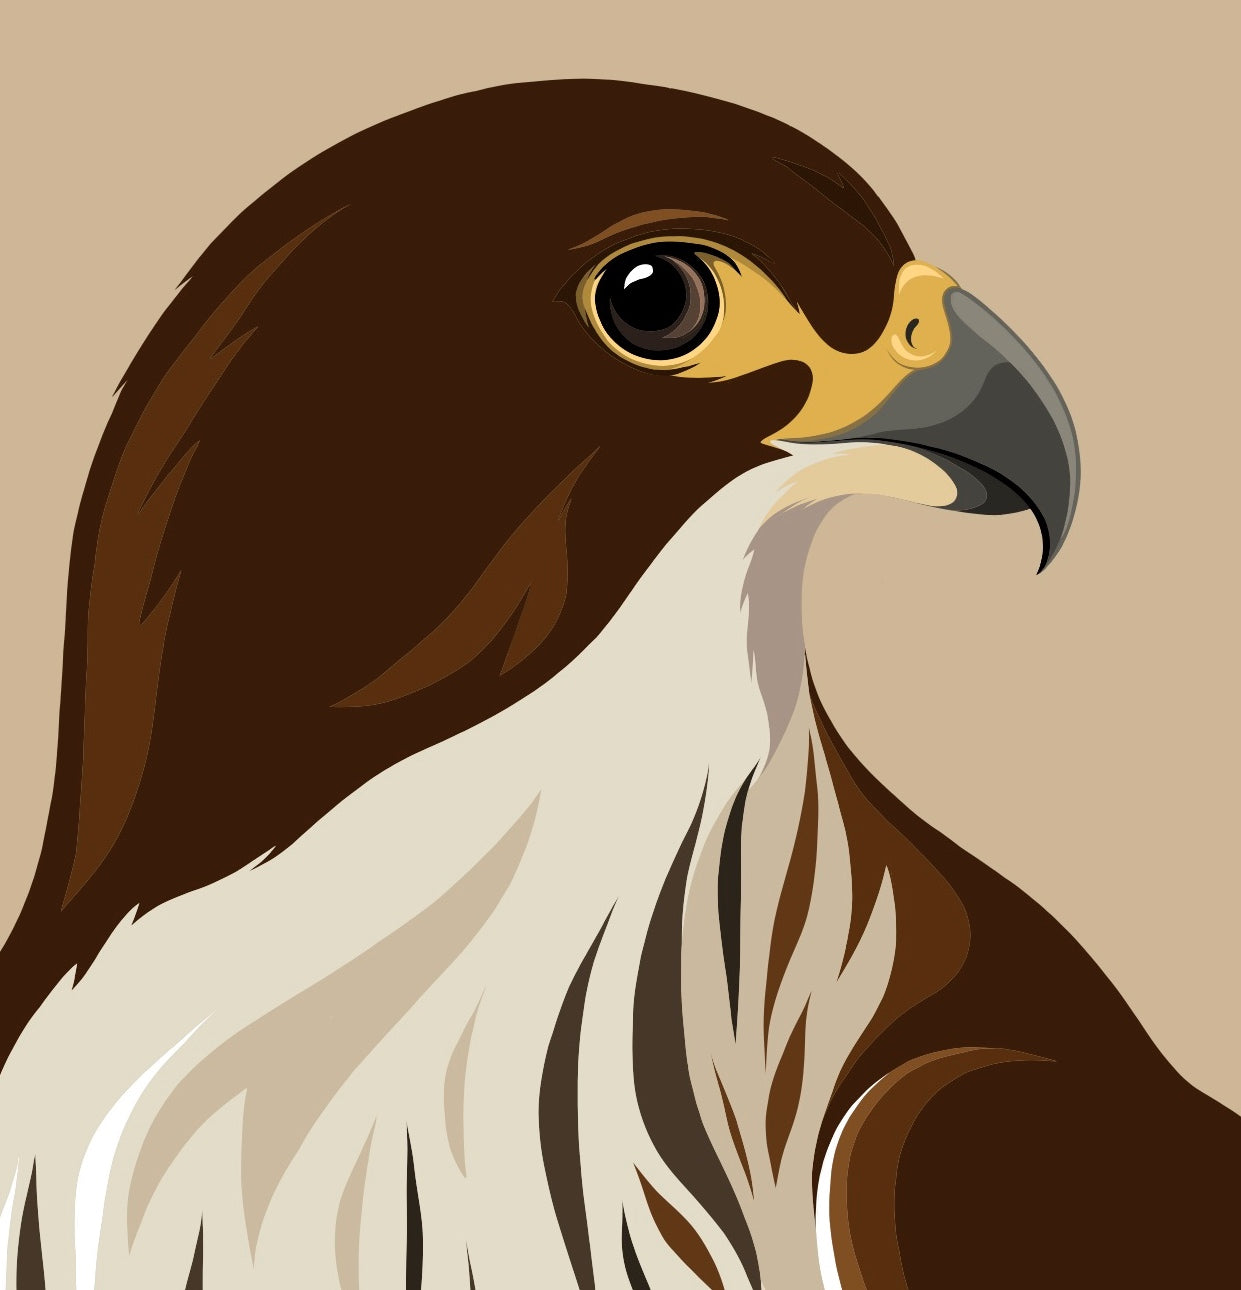 Closeup image of the Falcon caramel art print, by NZ artist Hansby Design